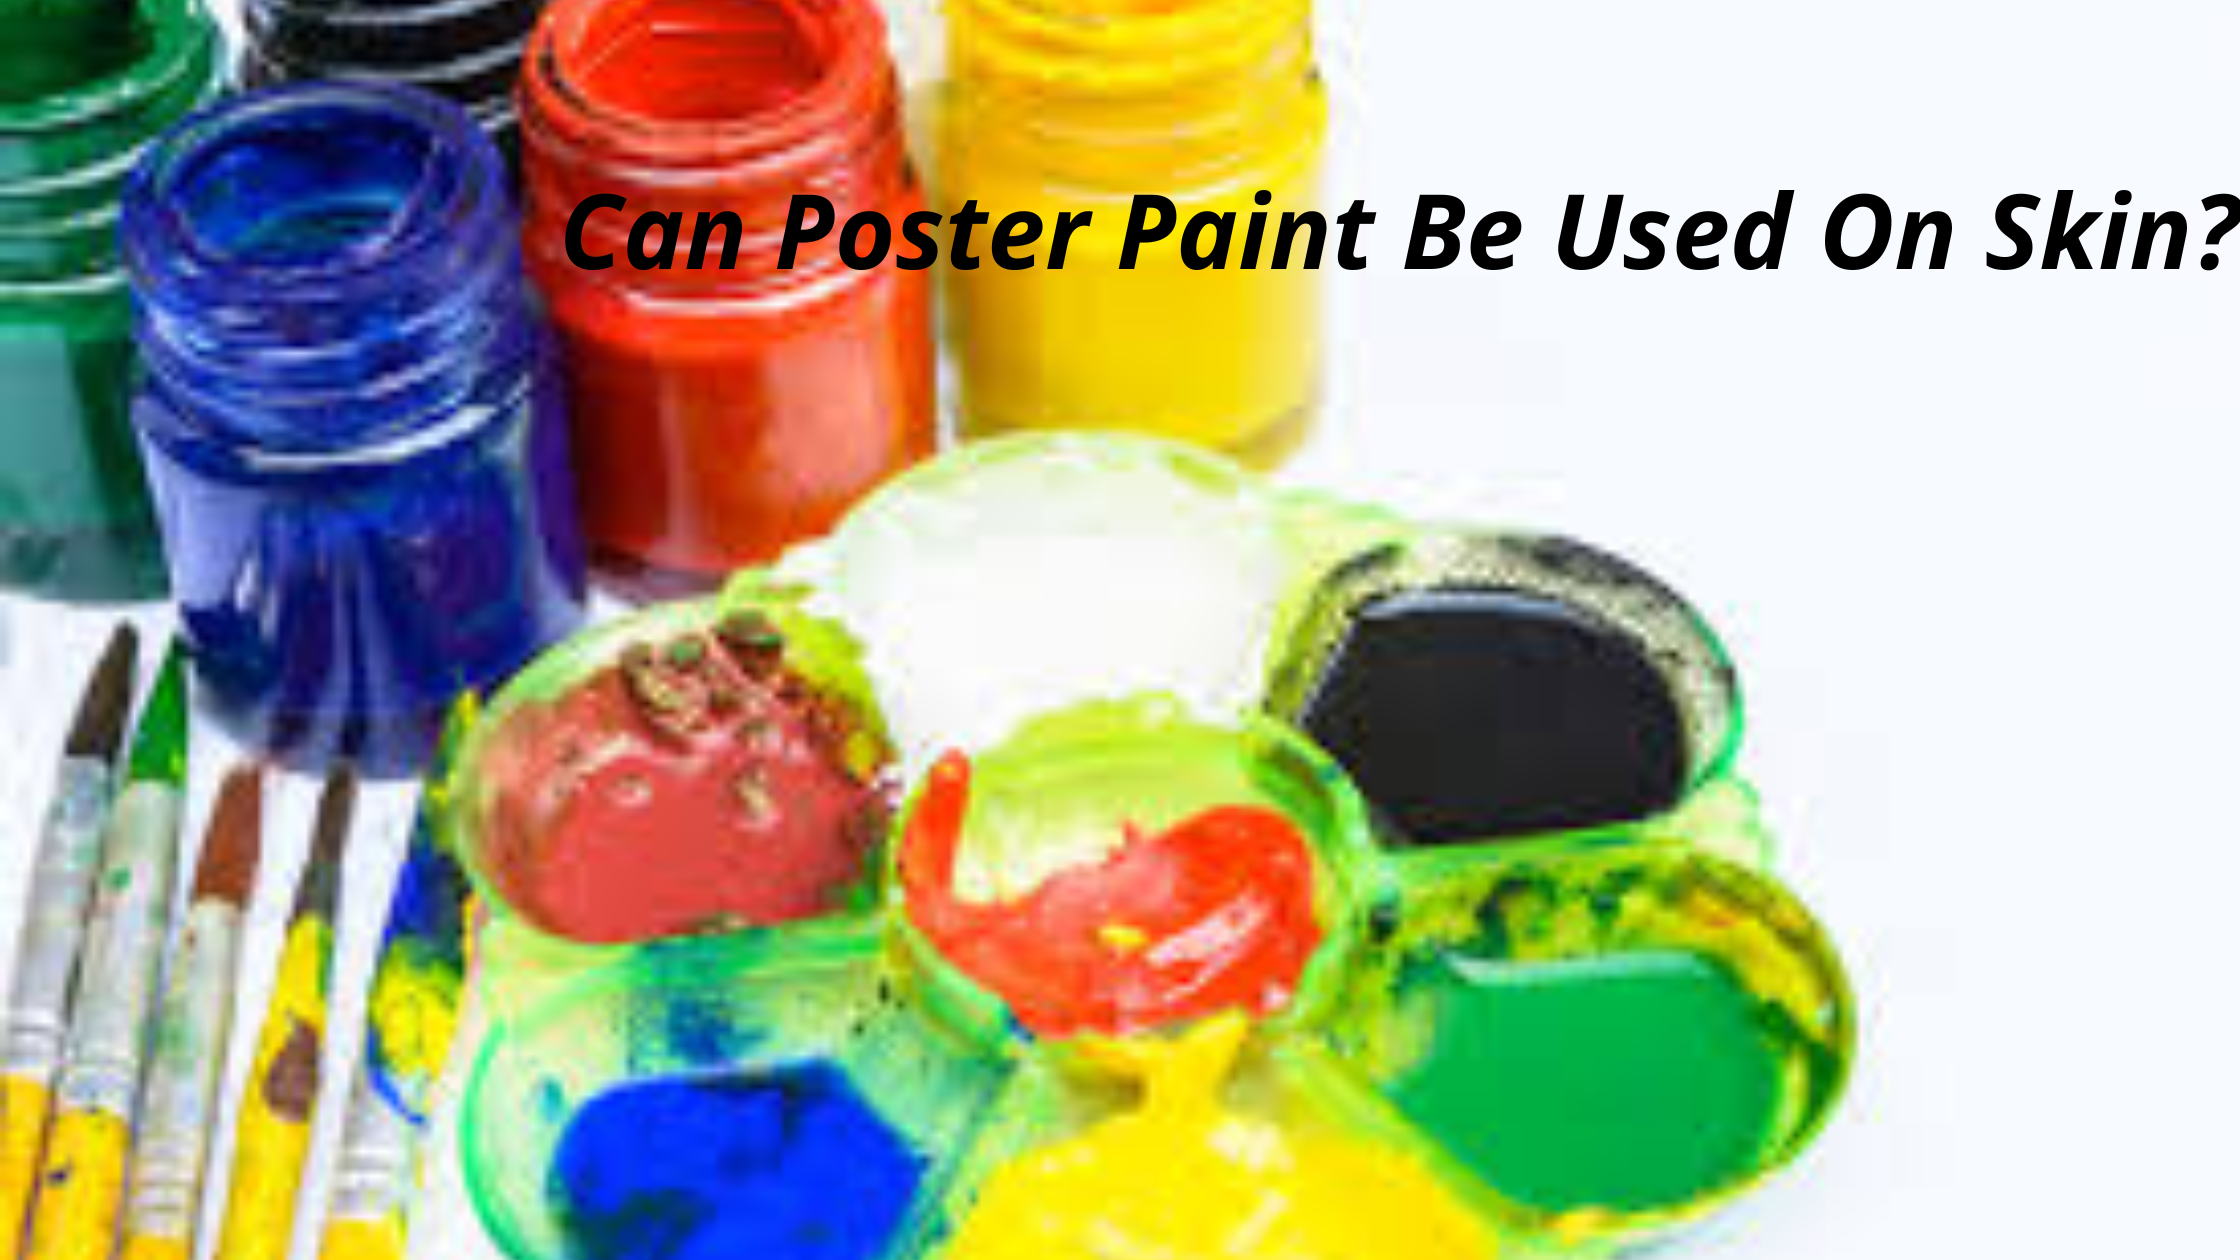 Can Poster Paint Be Used On Skin?